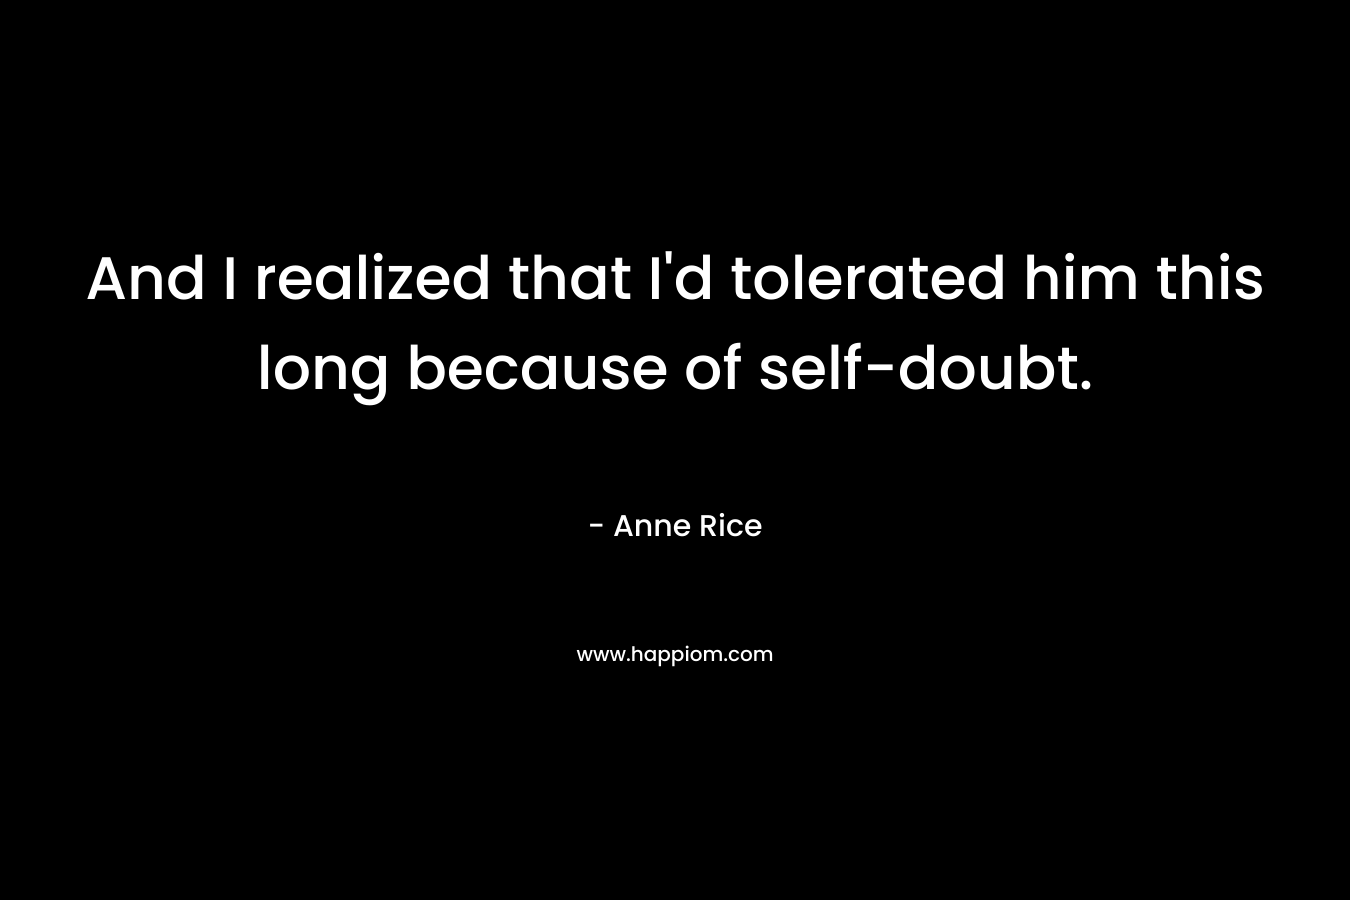 And I realized that I'd tolerated him this long because of self-doubt.